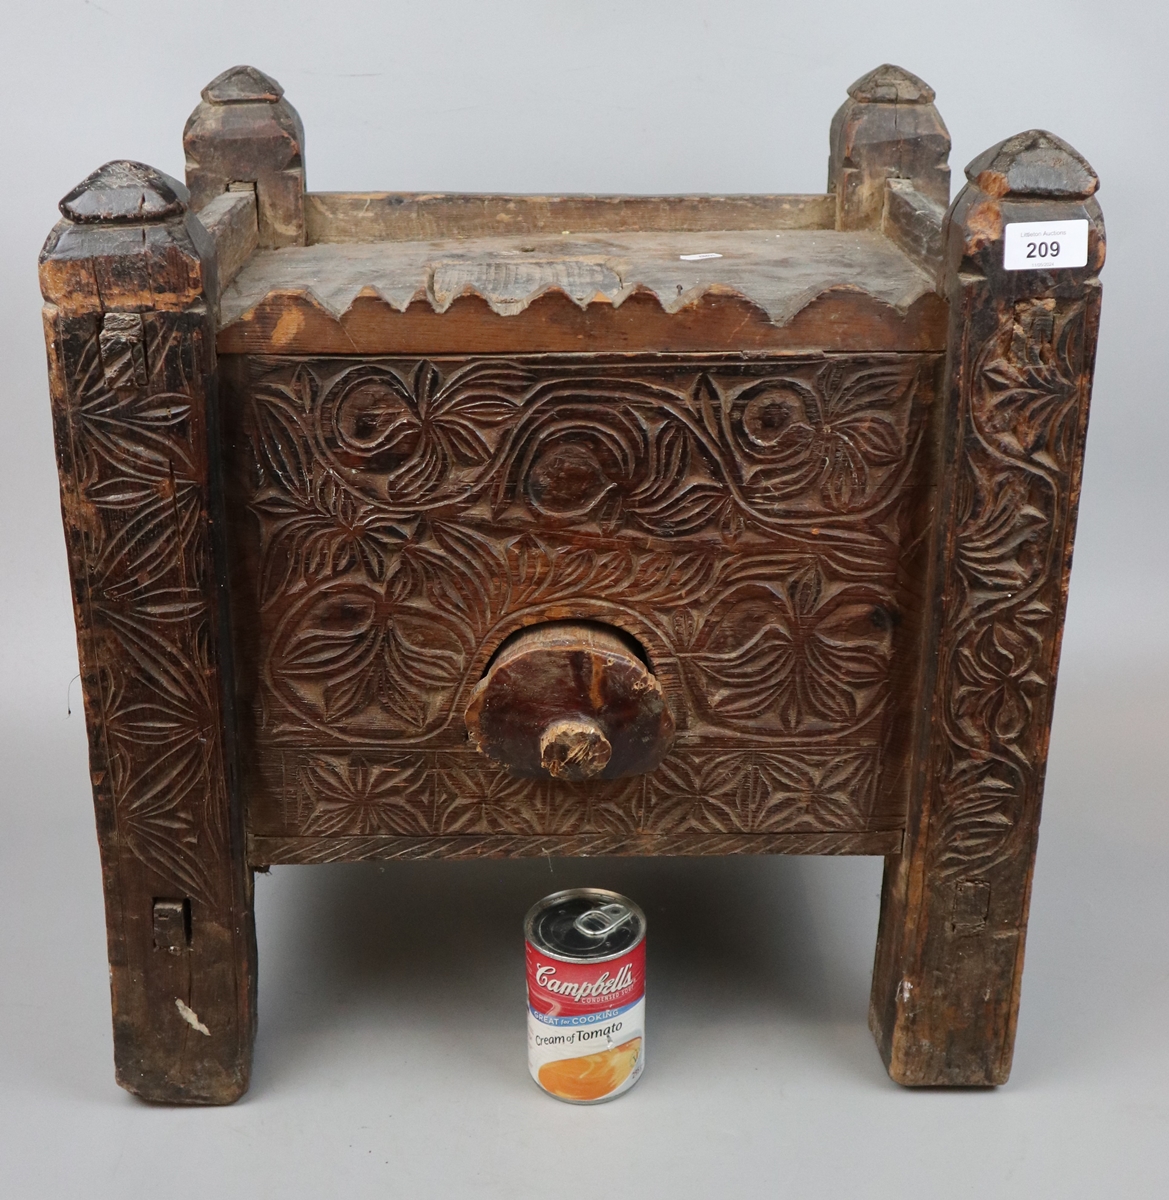 Antique carved Indian chest - Approx size: W: 49cm D: 36cm H: 53cm - Image 2 of 4